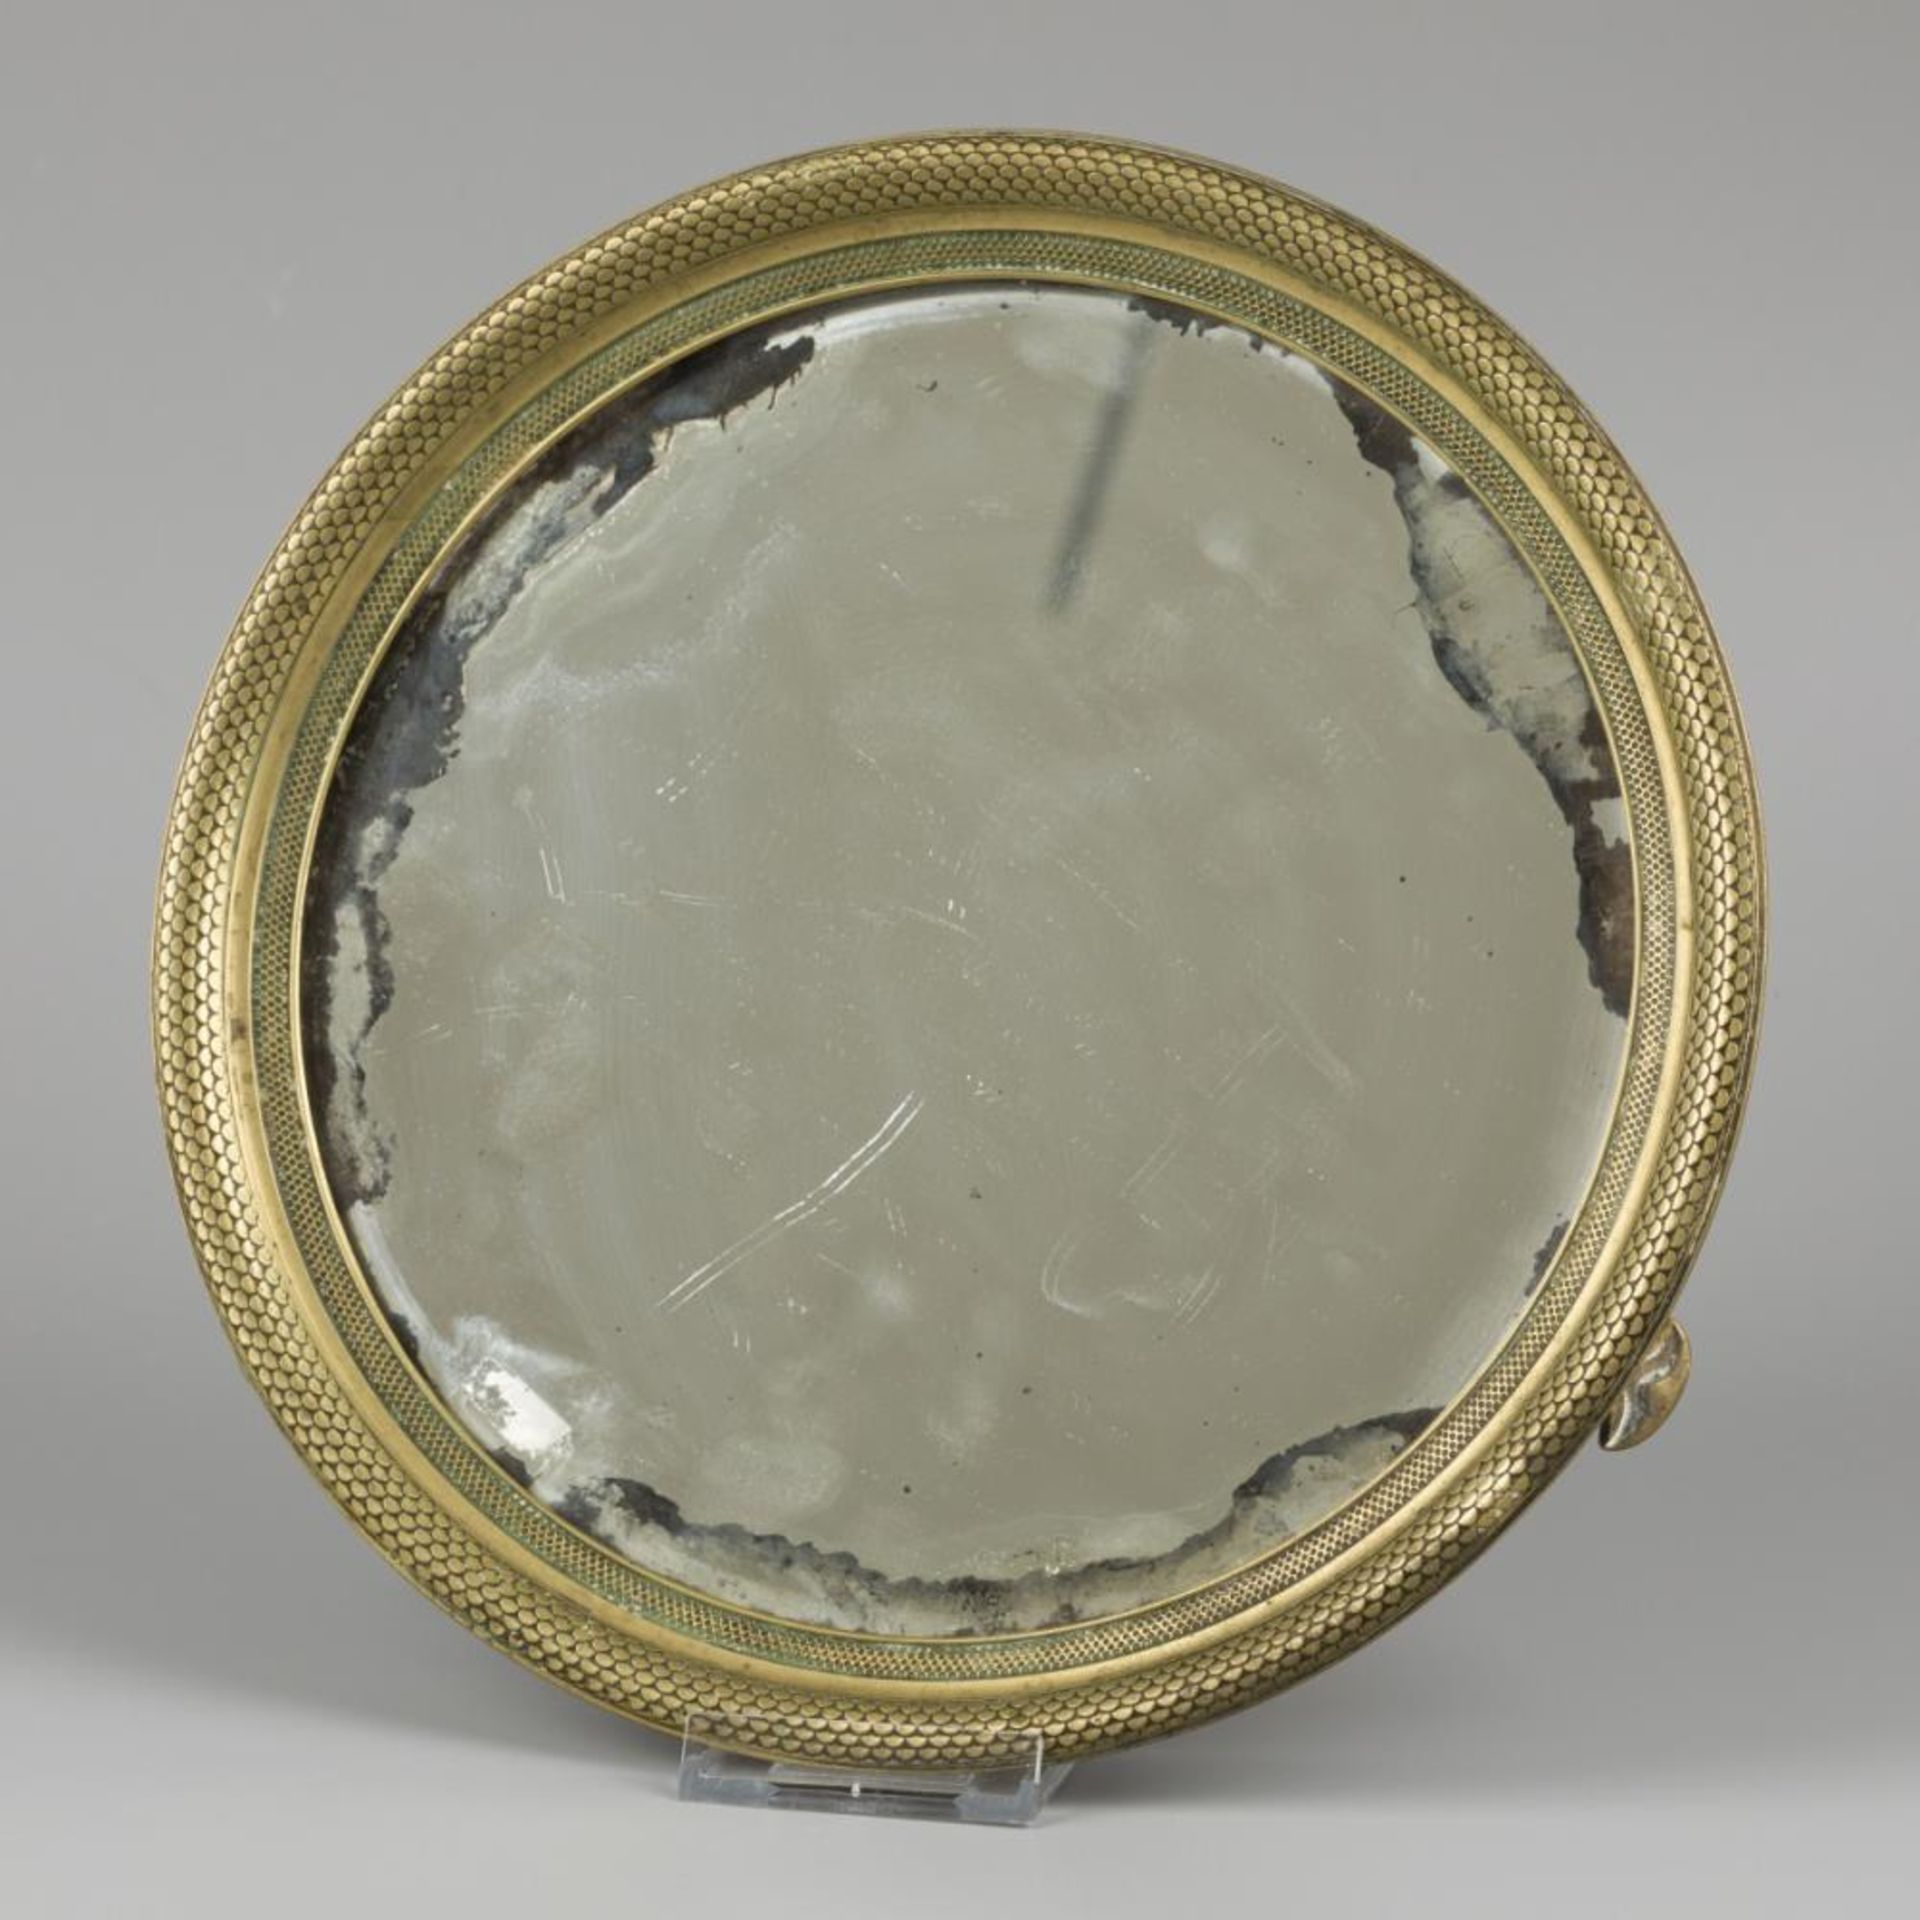 A bronze cabaret with mirror glass, early 19th century. - Image 2 of 2